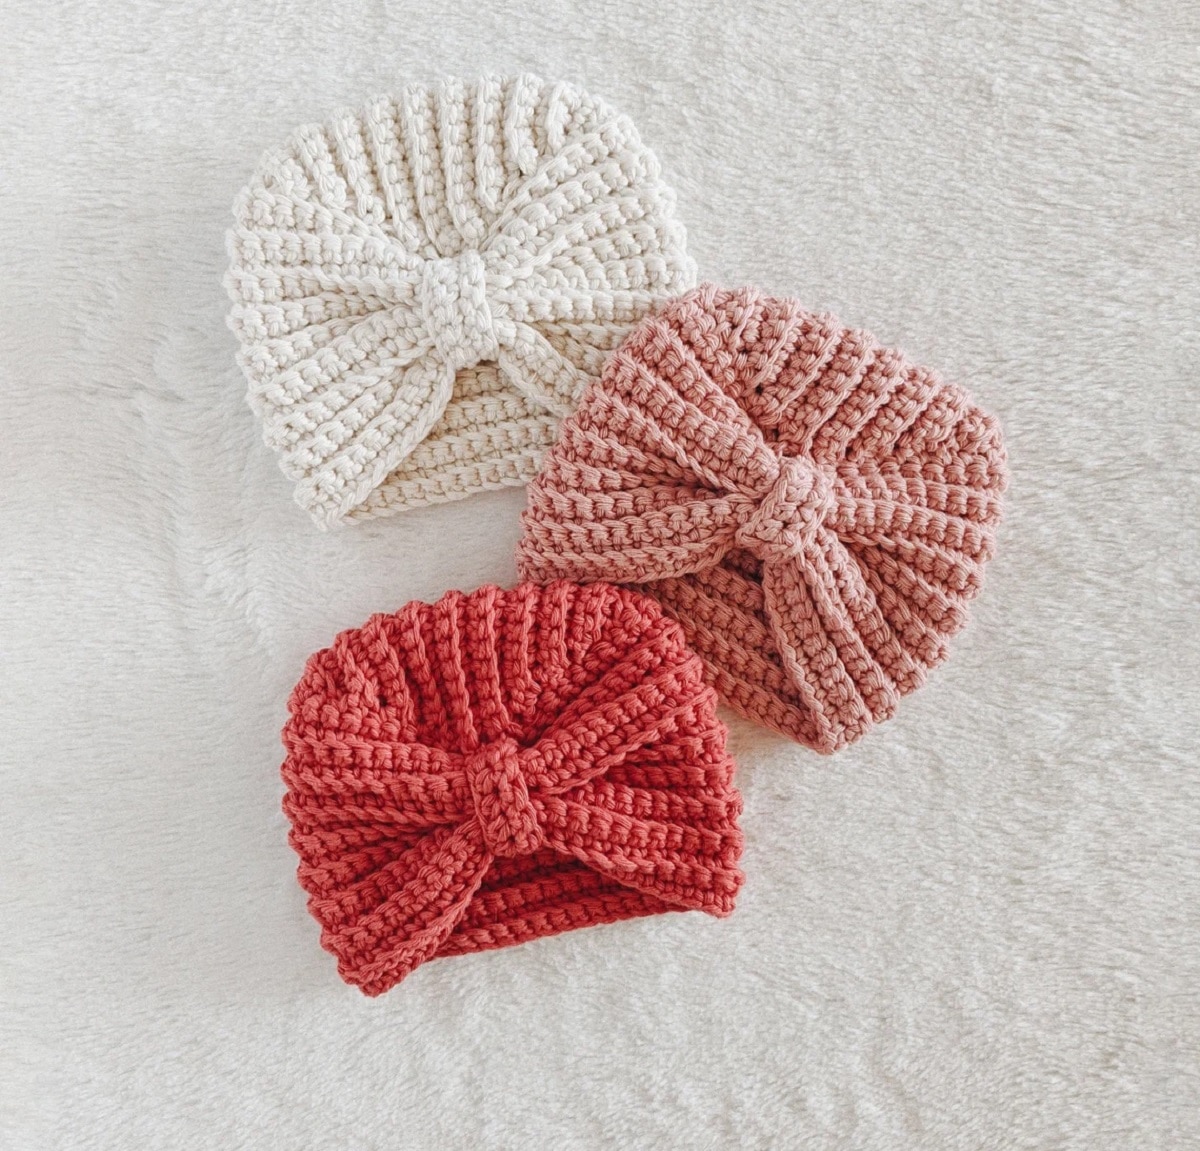 Pink, pale pink, and white turban style crochet baby hats with a bow style in the center on a white soft background.